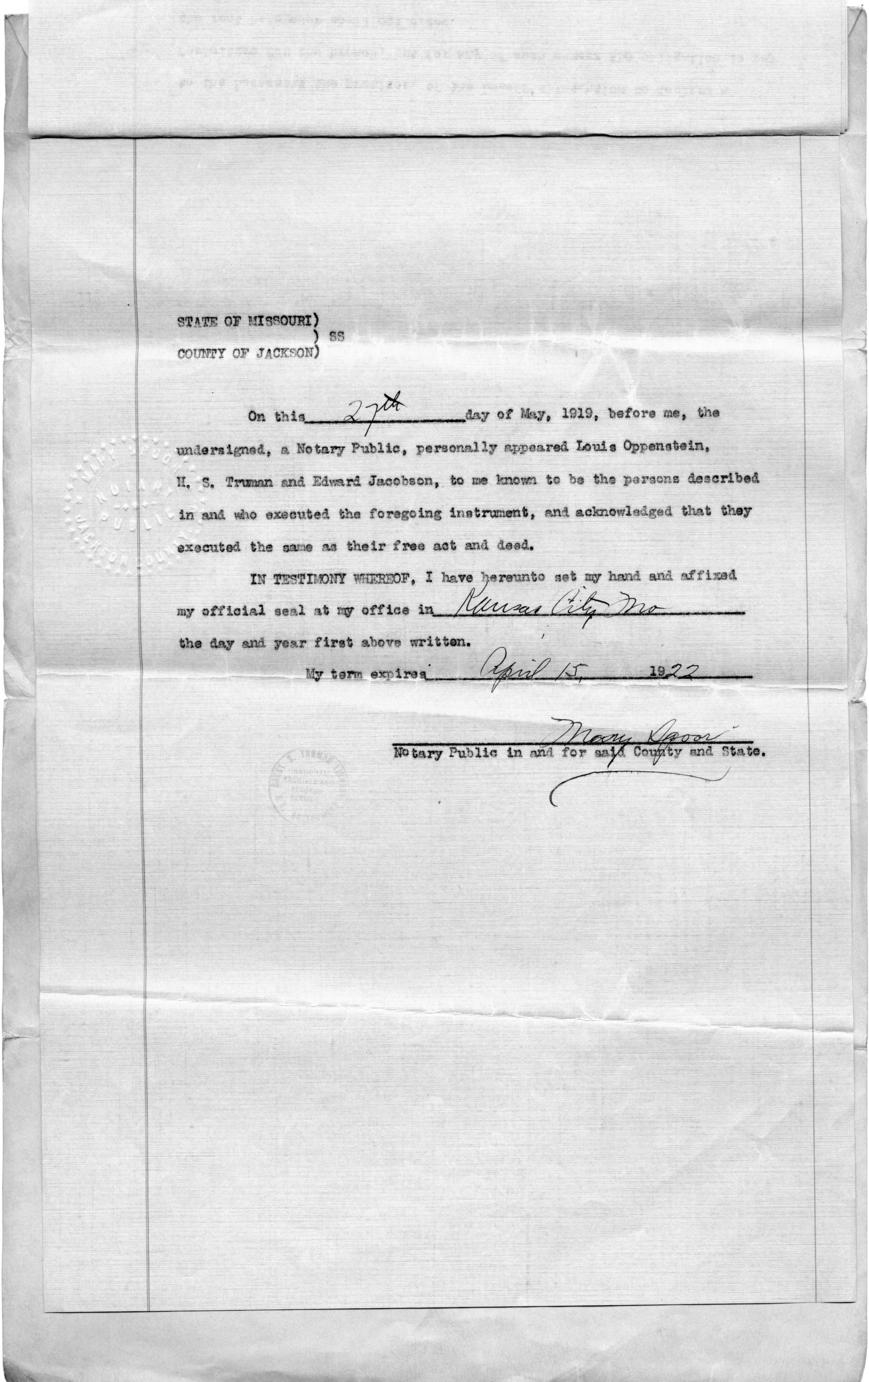 Lease, Louis Oppenstein to Harry S. Truman and Edward Jacobson